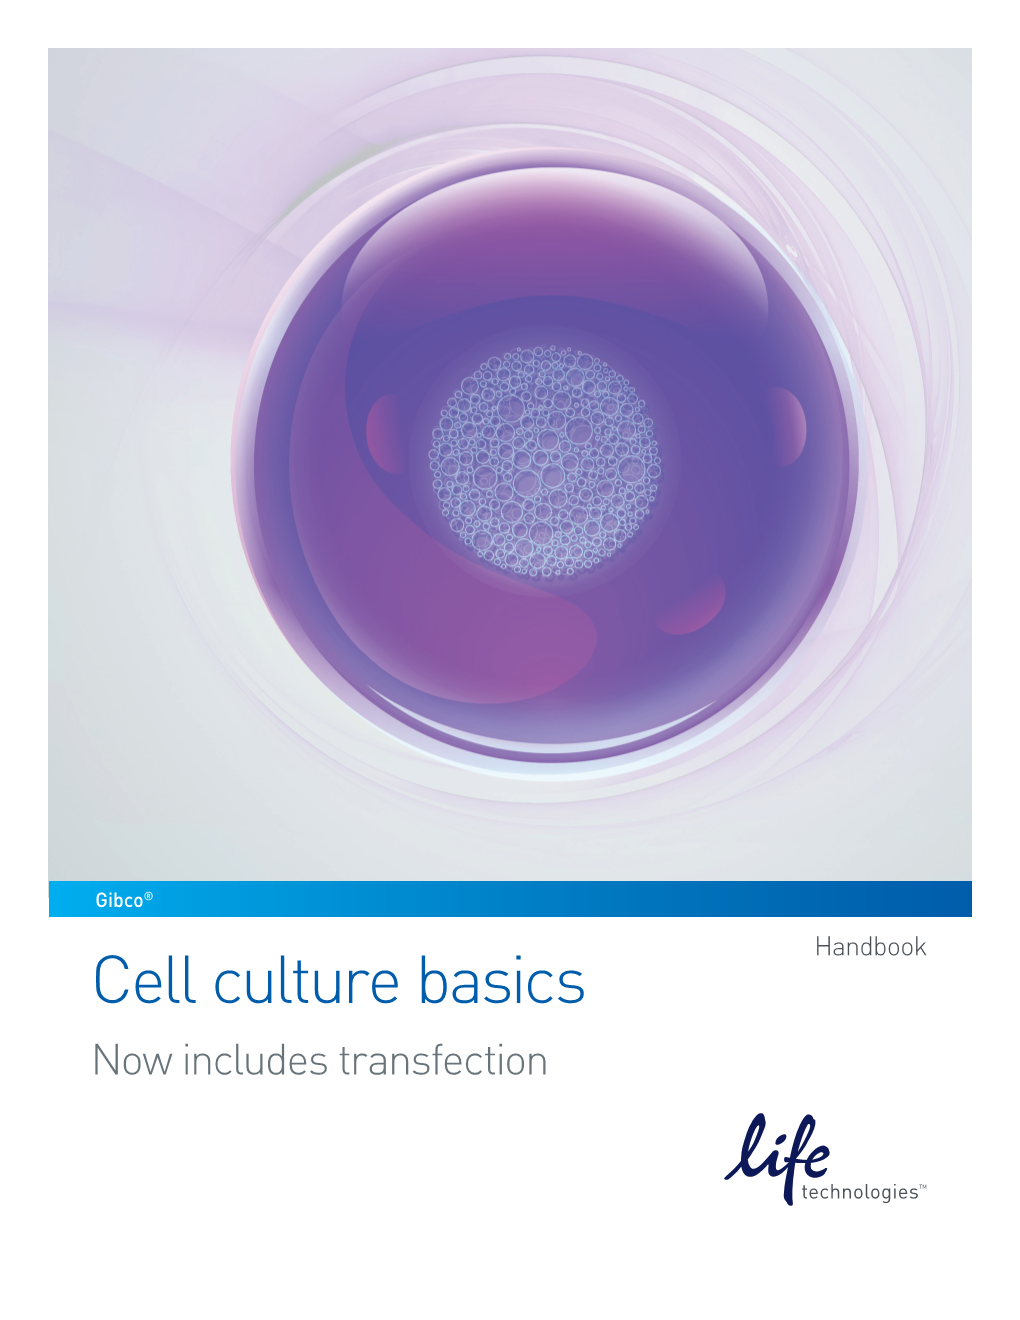 Cell Culture Basics Now Includes Transfection Information in This Document Is Subject to Change Without Notice